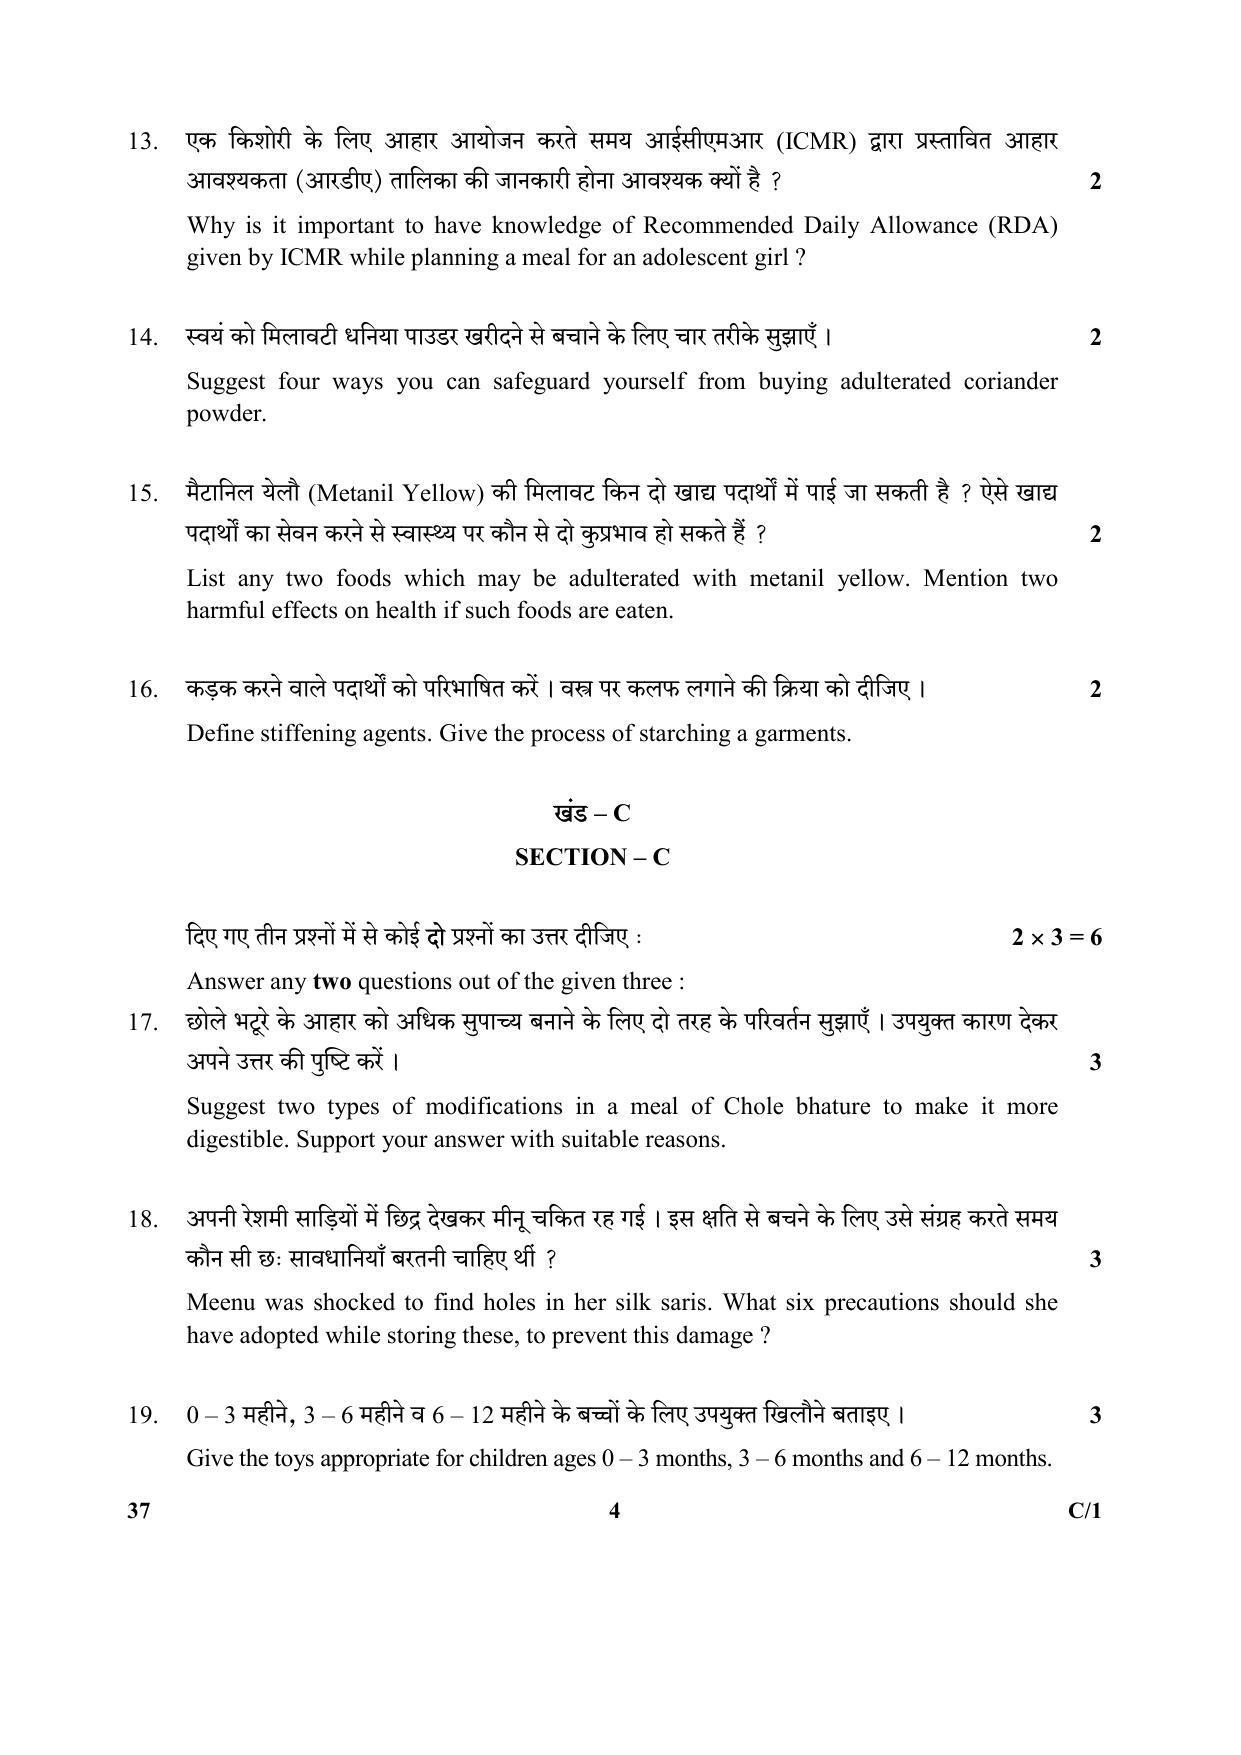 CBSE Class 10 37 (Home Science) 2018 Compartment Question Paper - Page 4